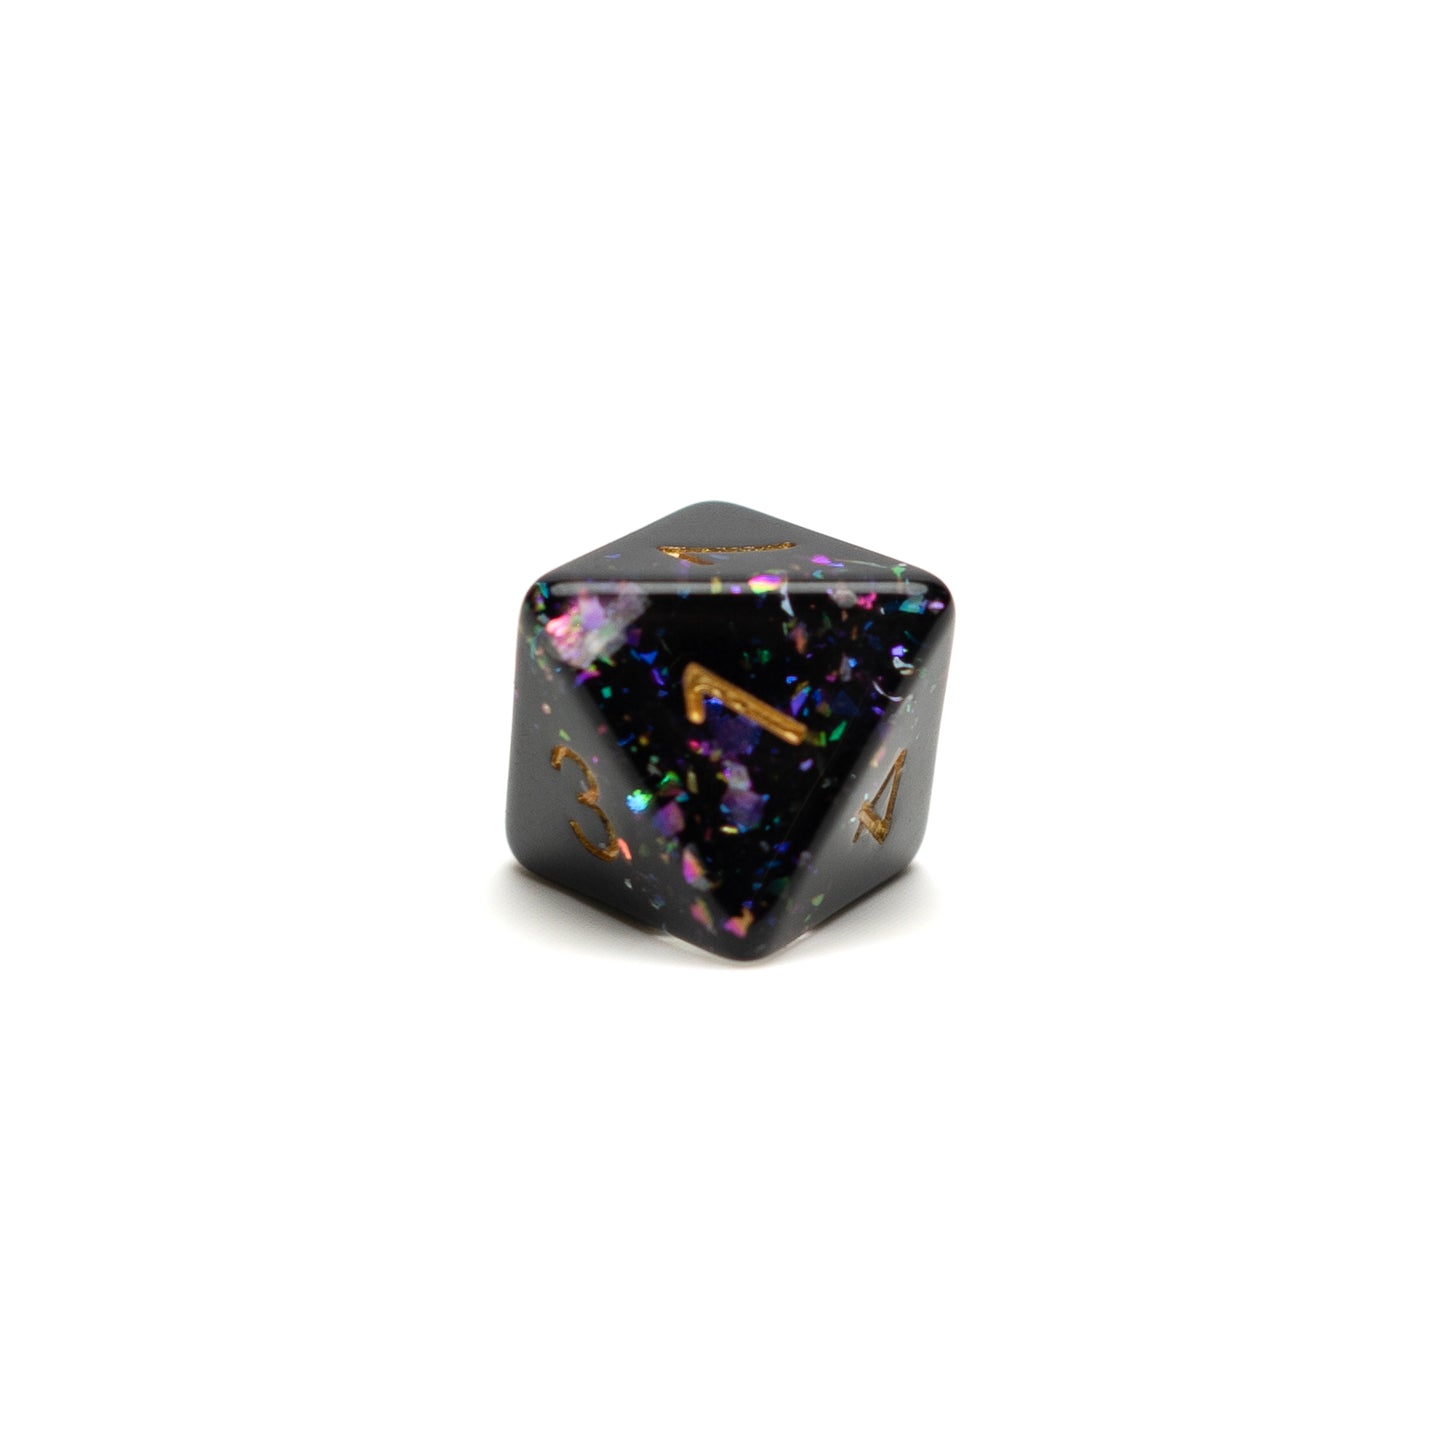 Roll Britannia Derek Normalbeard Dungeons and Dragons D8 Dice with Rainbow Glitter Confetti Aesthetic